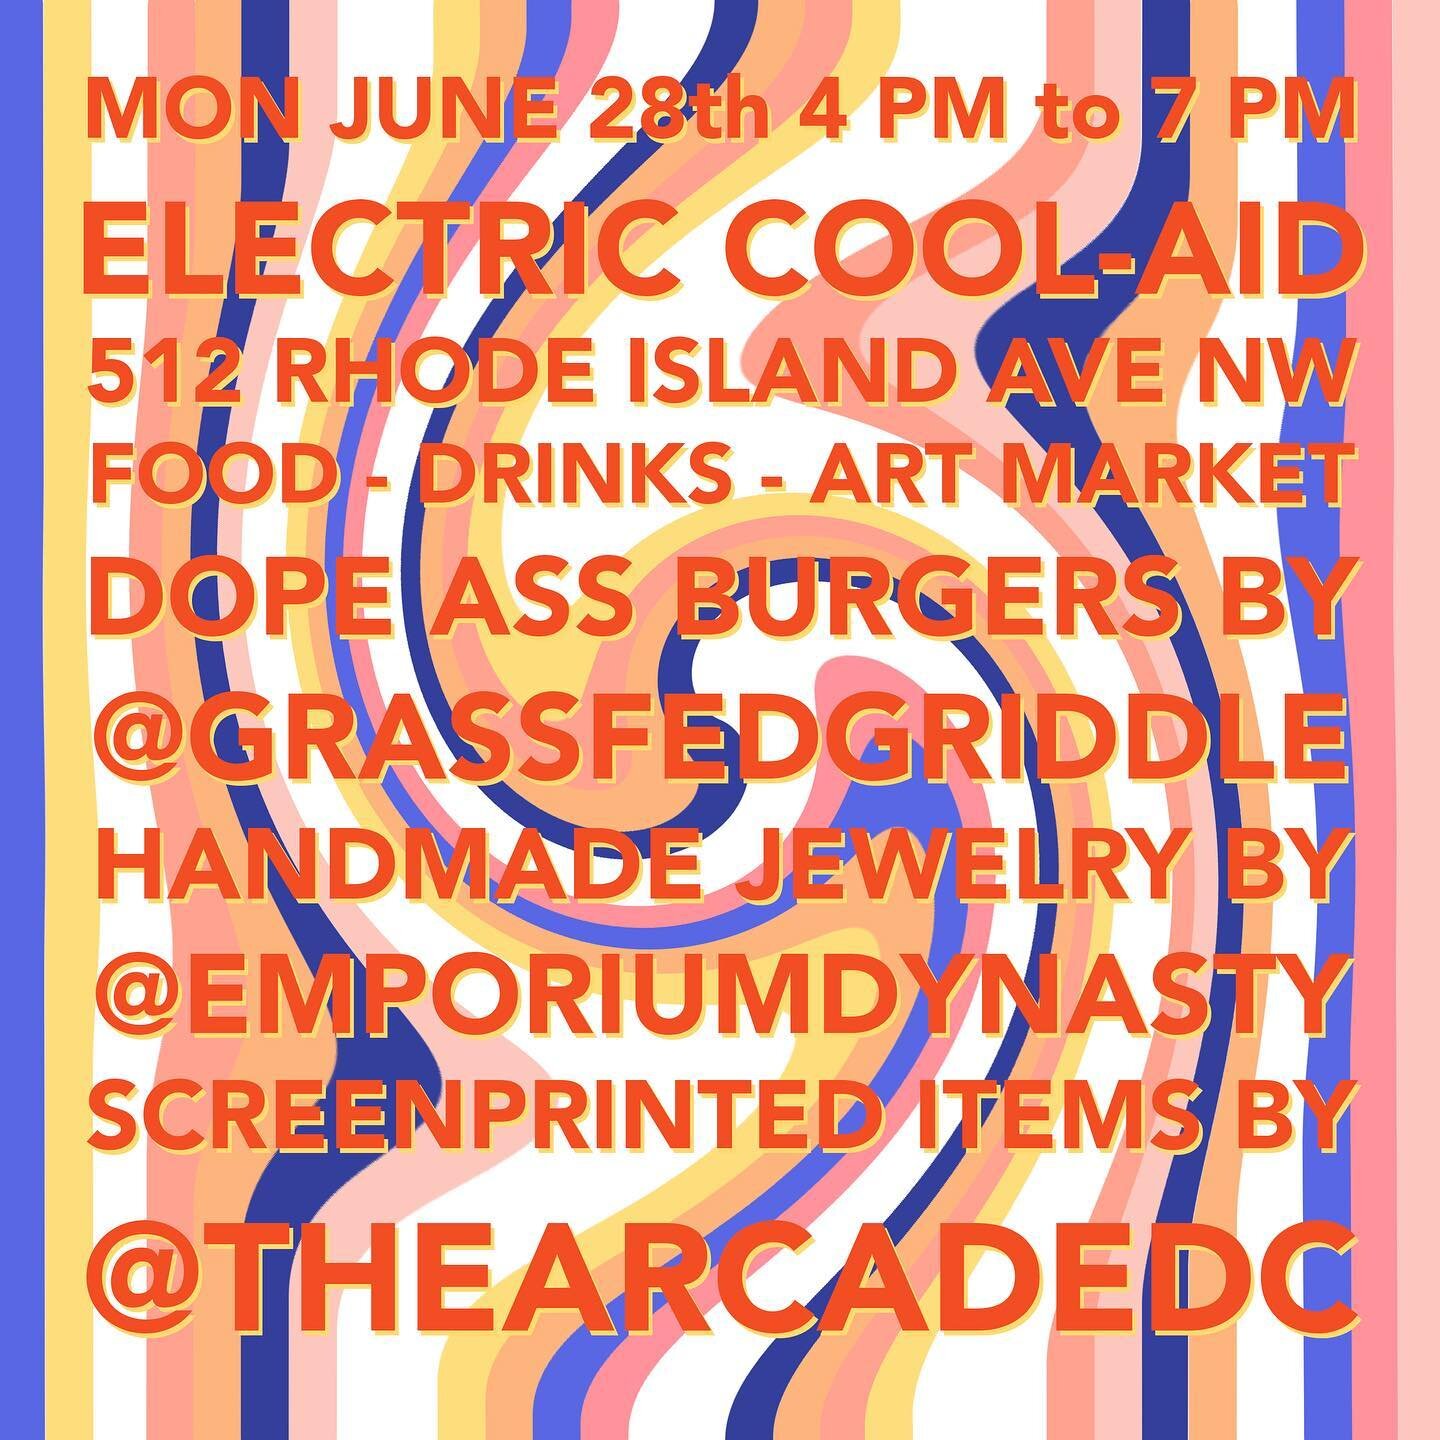 Mark your calendars! Next Monday we&rsquo;ll be at Electric Cool-Aid from 4-7 pm with all kinds of goodies available. Grab a refreshing frozen beverage from @electric_cool_aid and a burger from @grassfedgriddle (I can personally attest, they are awes